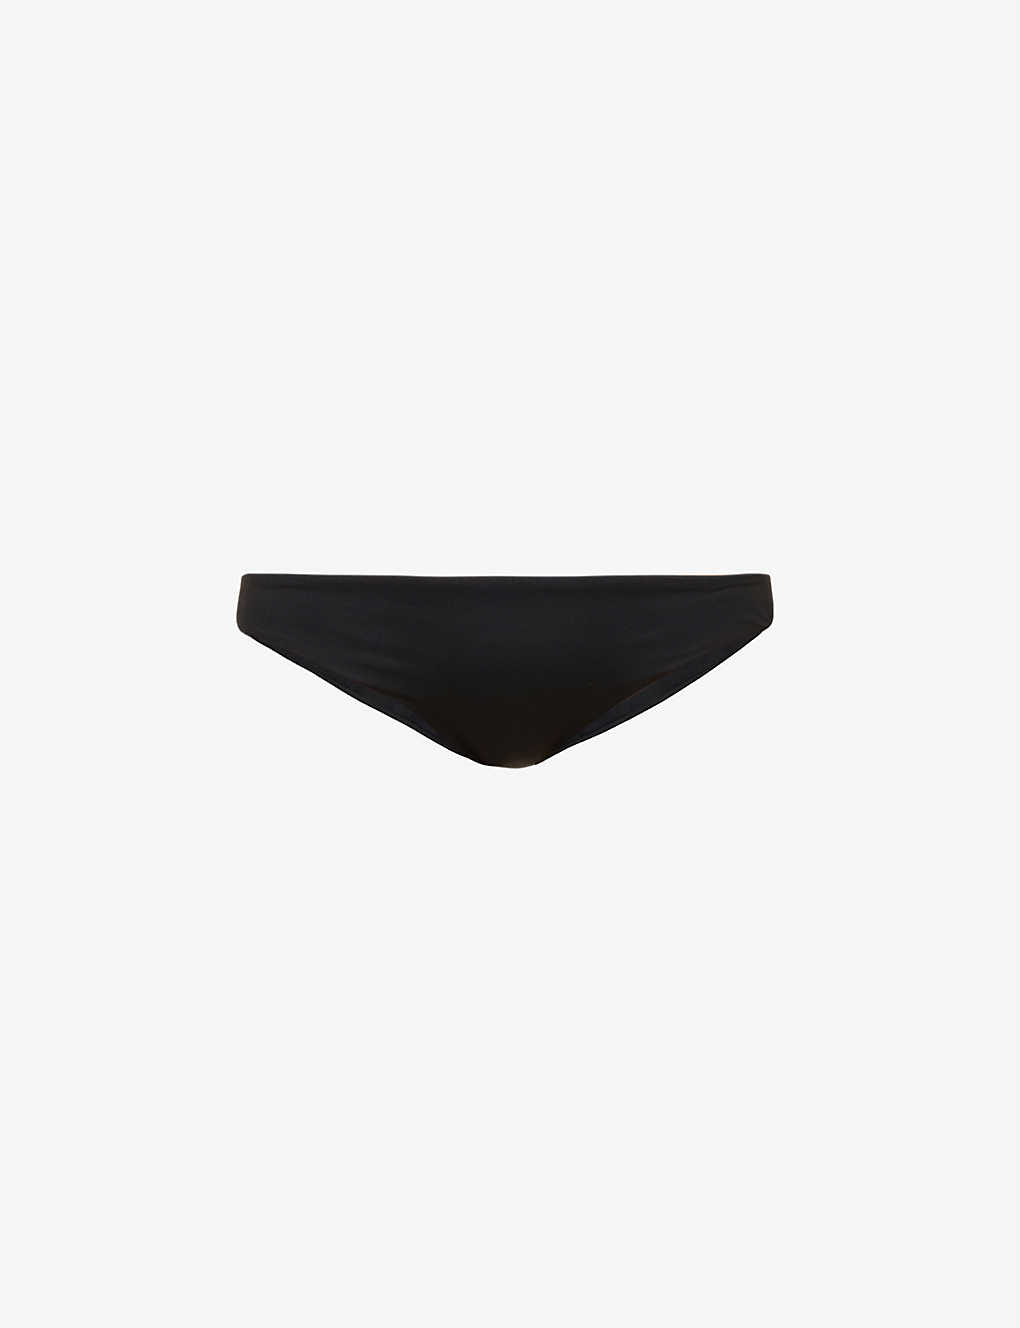 Shop Seafolly Women's Black Collective Hipster Low-rise Recycled Nylon-blend Bikini Bottoms